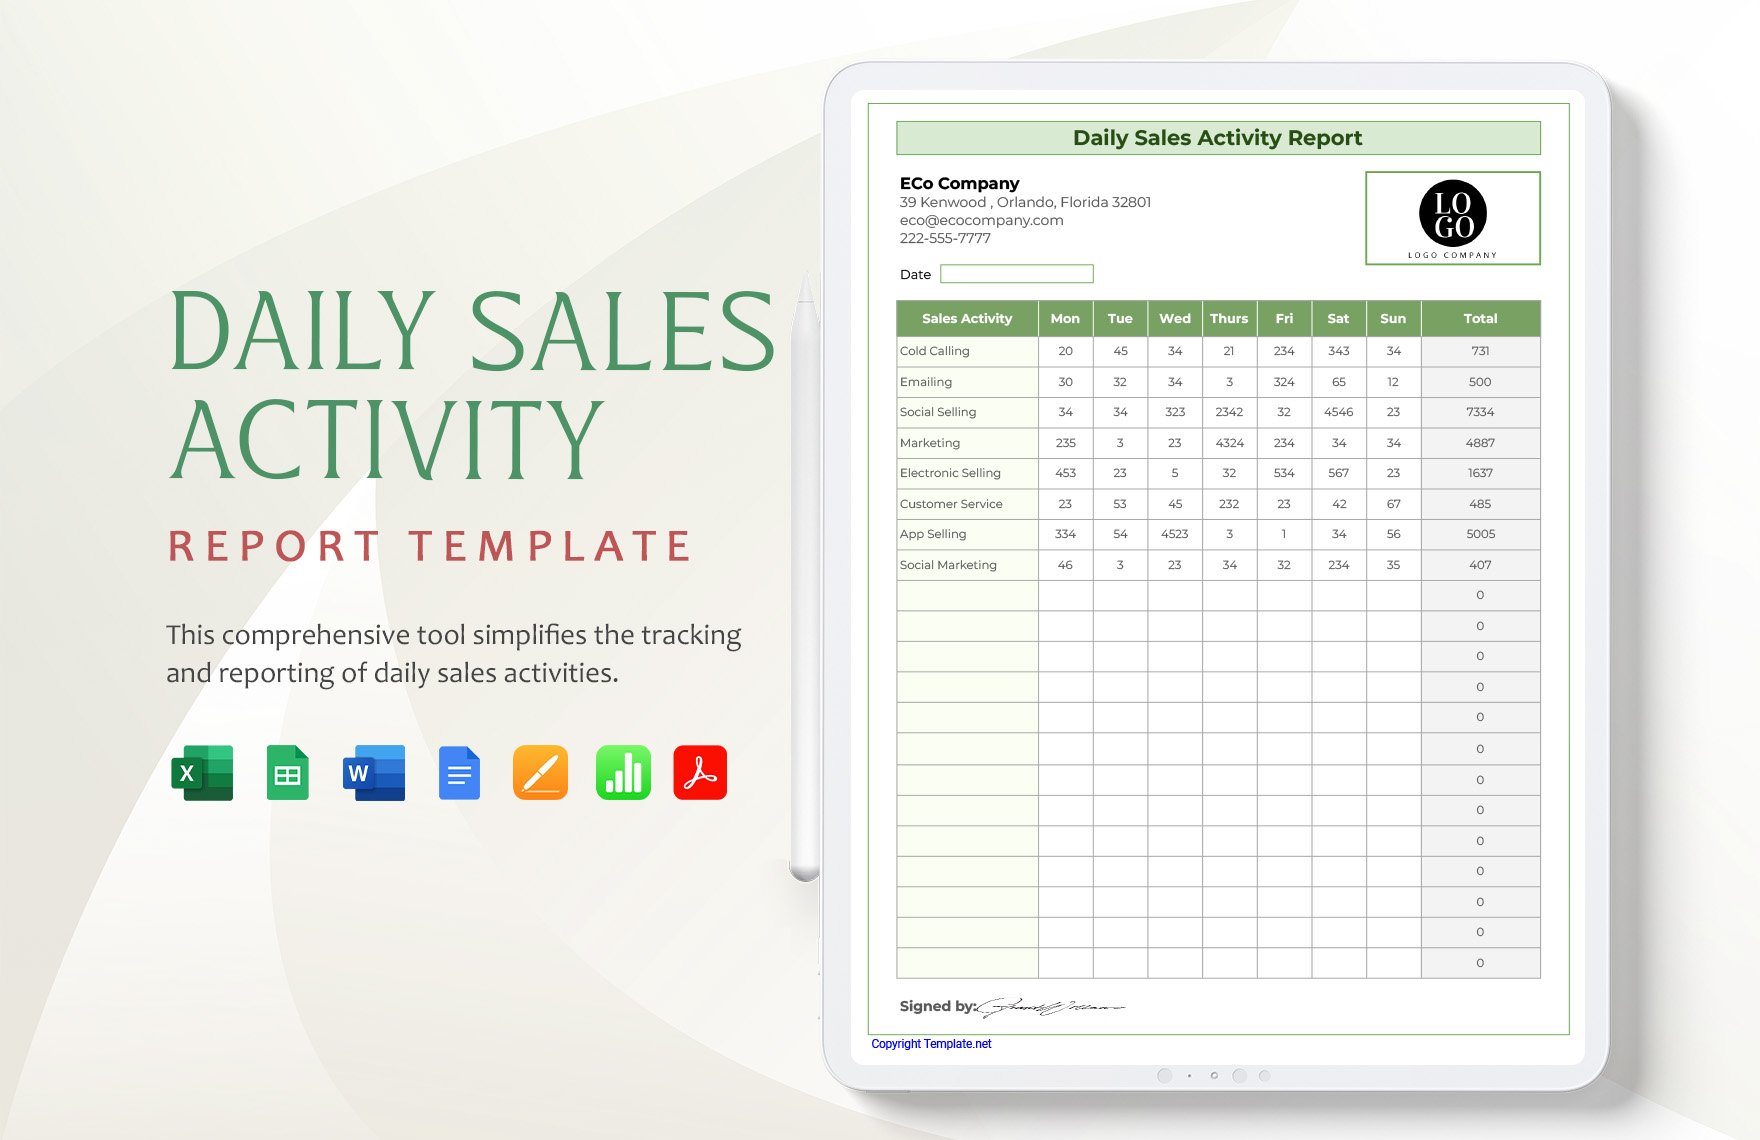 Daily Sales Activity Report Template in Word, Google Docs, Excel, PDF, Google Sheets, Apple Pages, Apple Numbers